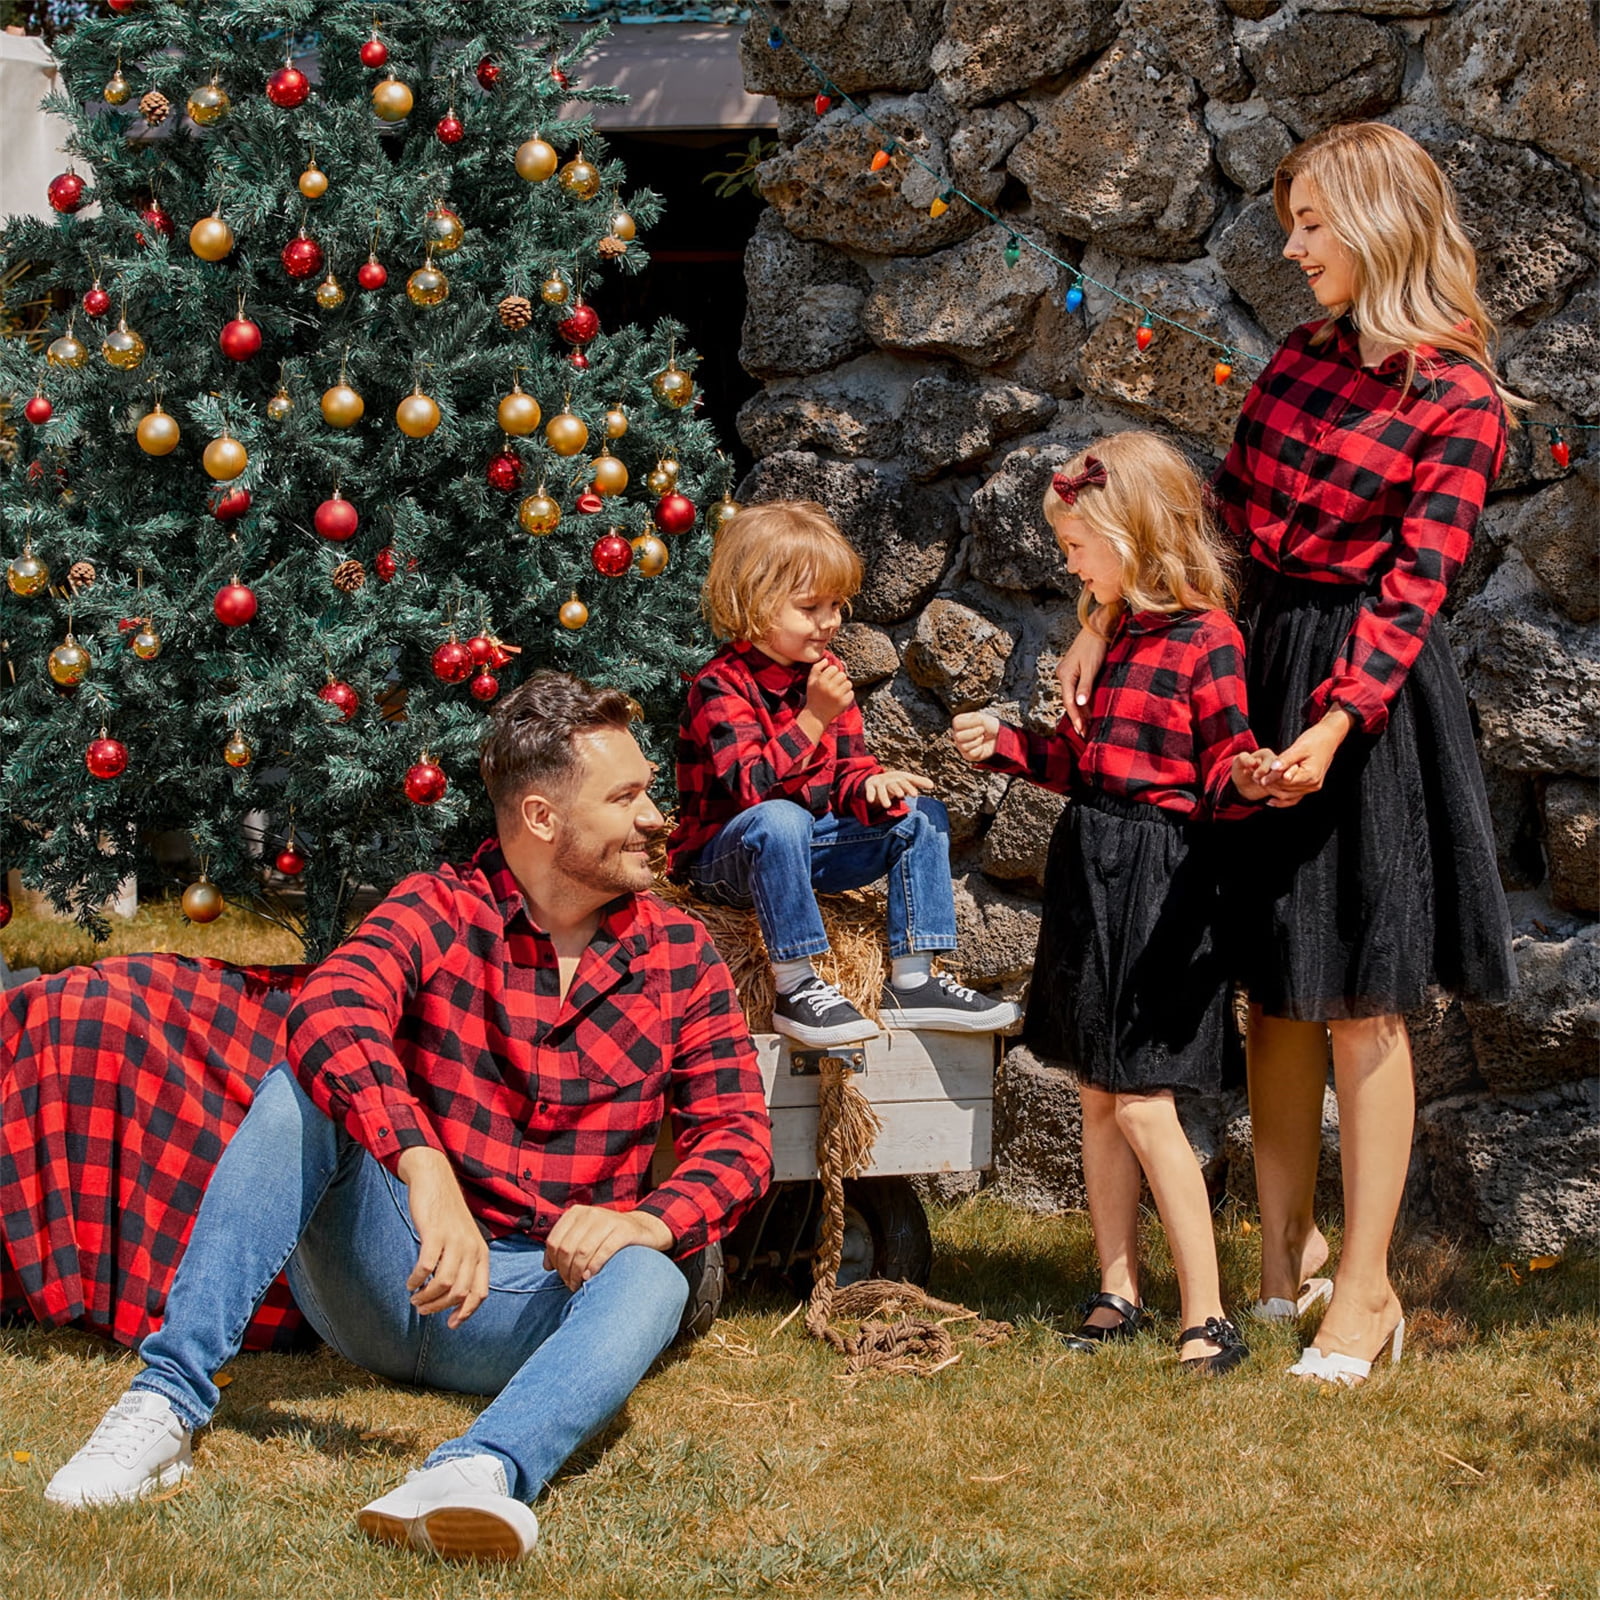 Family Matching Red V Neck Splicing Lace Long-sleeve Belted Dresses and 100% Cotton Plaid Shirts Sets